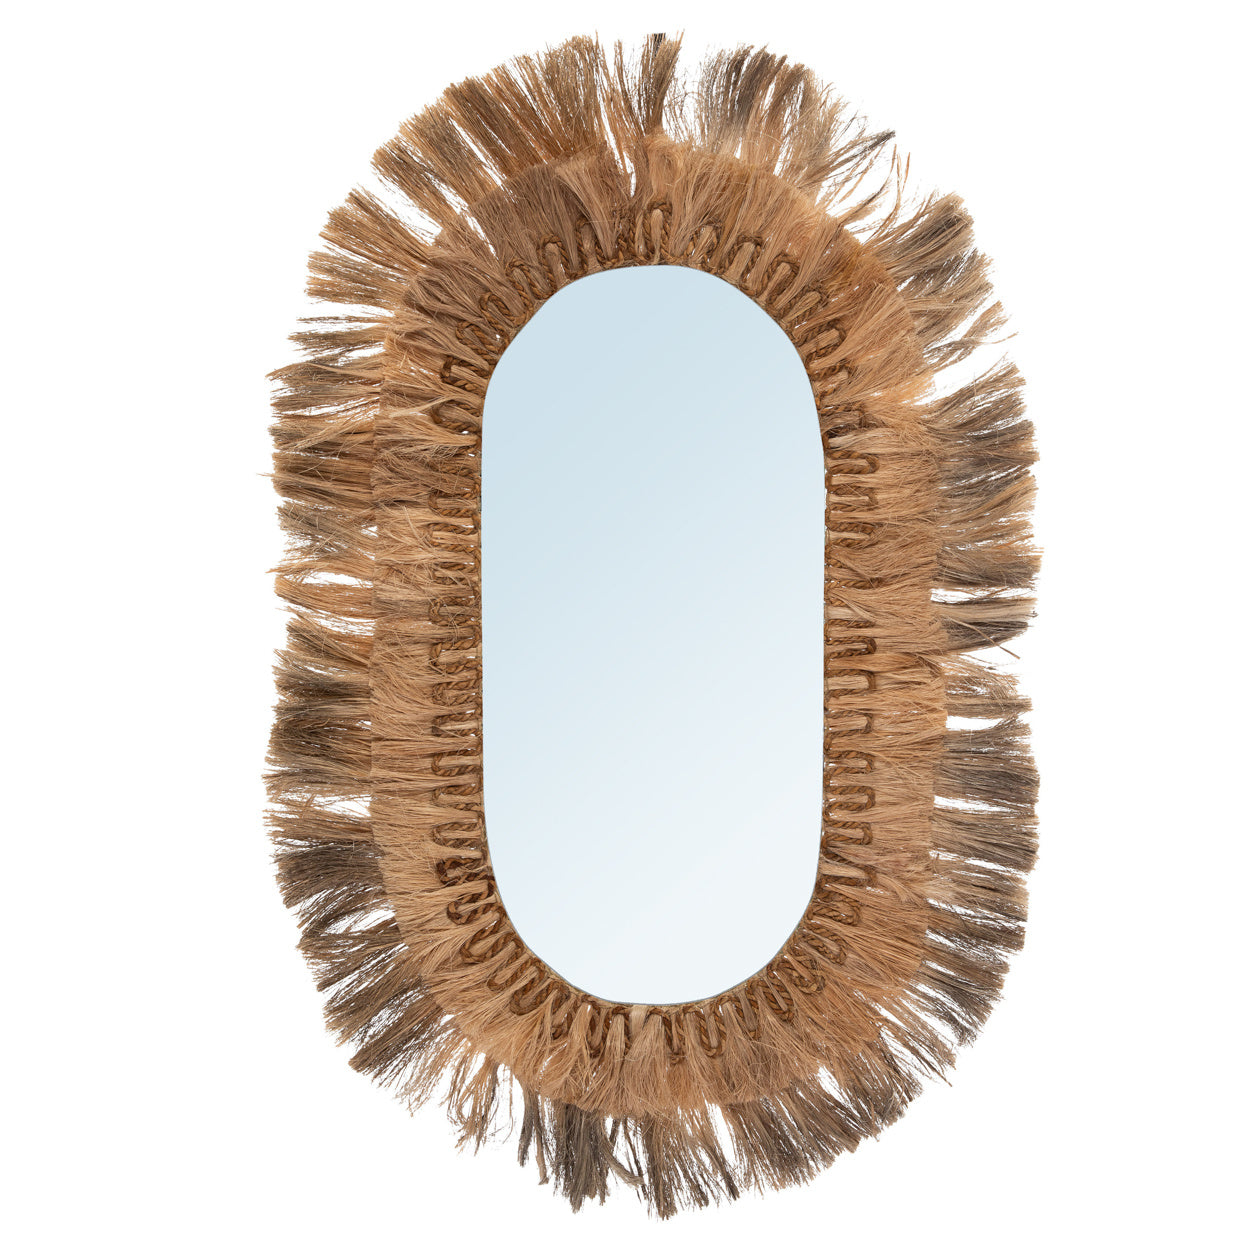 THE HUGE OVAL Mirror front view